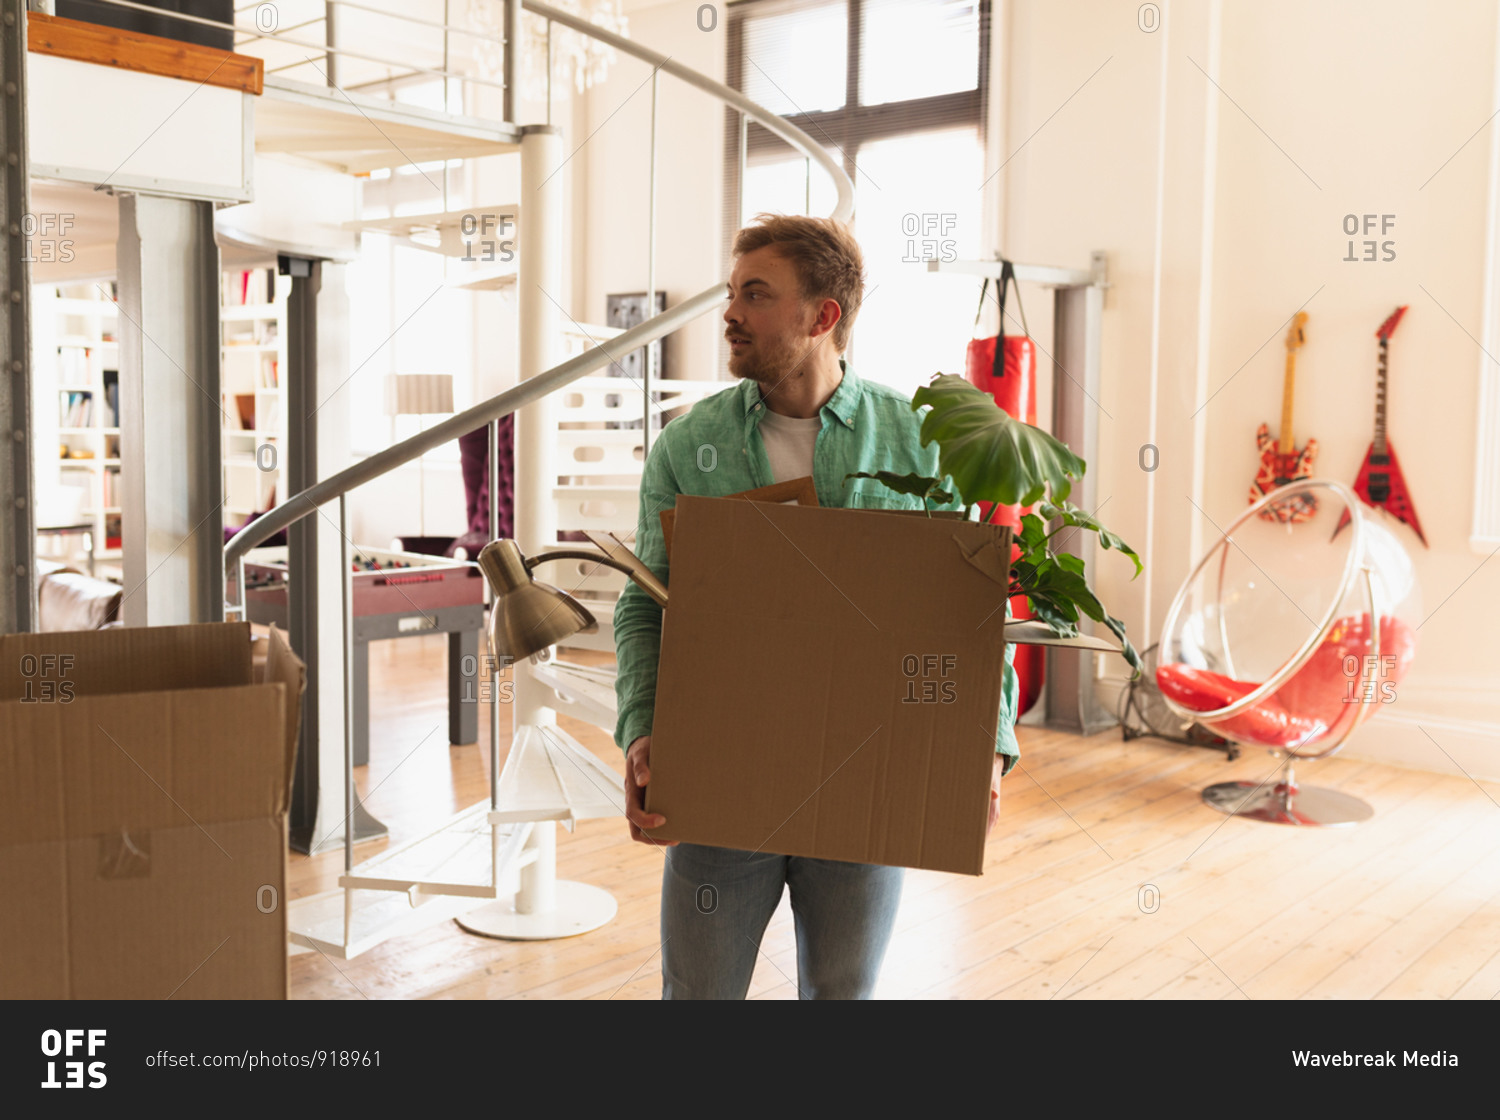 Front view of a young Caucasian man wearing green shirt, moving in to a new apartment, holding a cardboard box